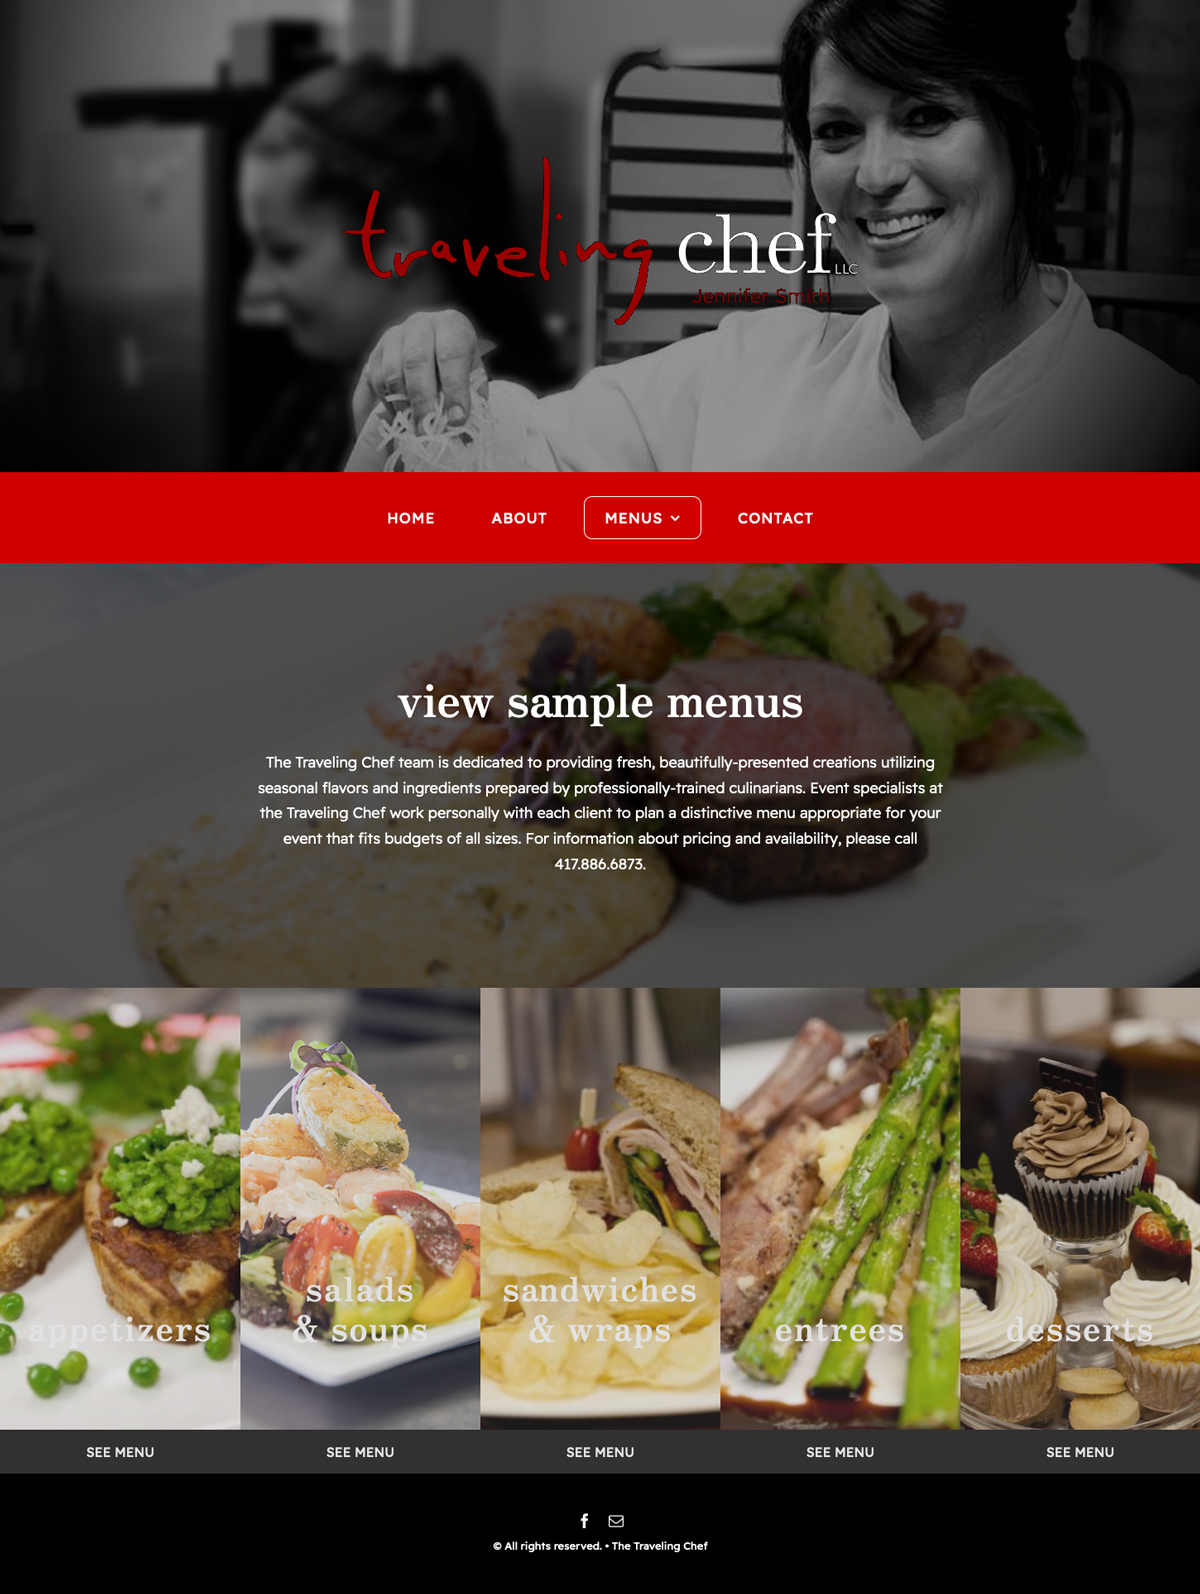 Website Design for The Traveling Chef Catering and Personal Chef - Menus